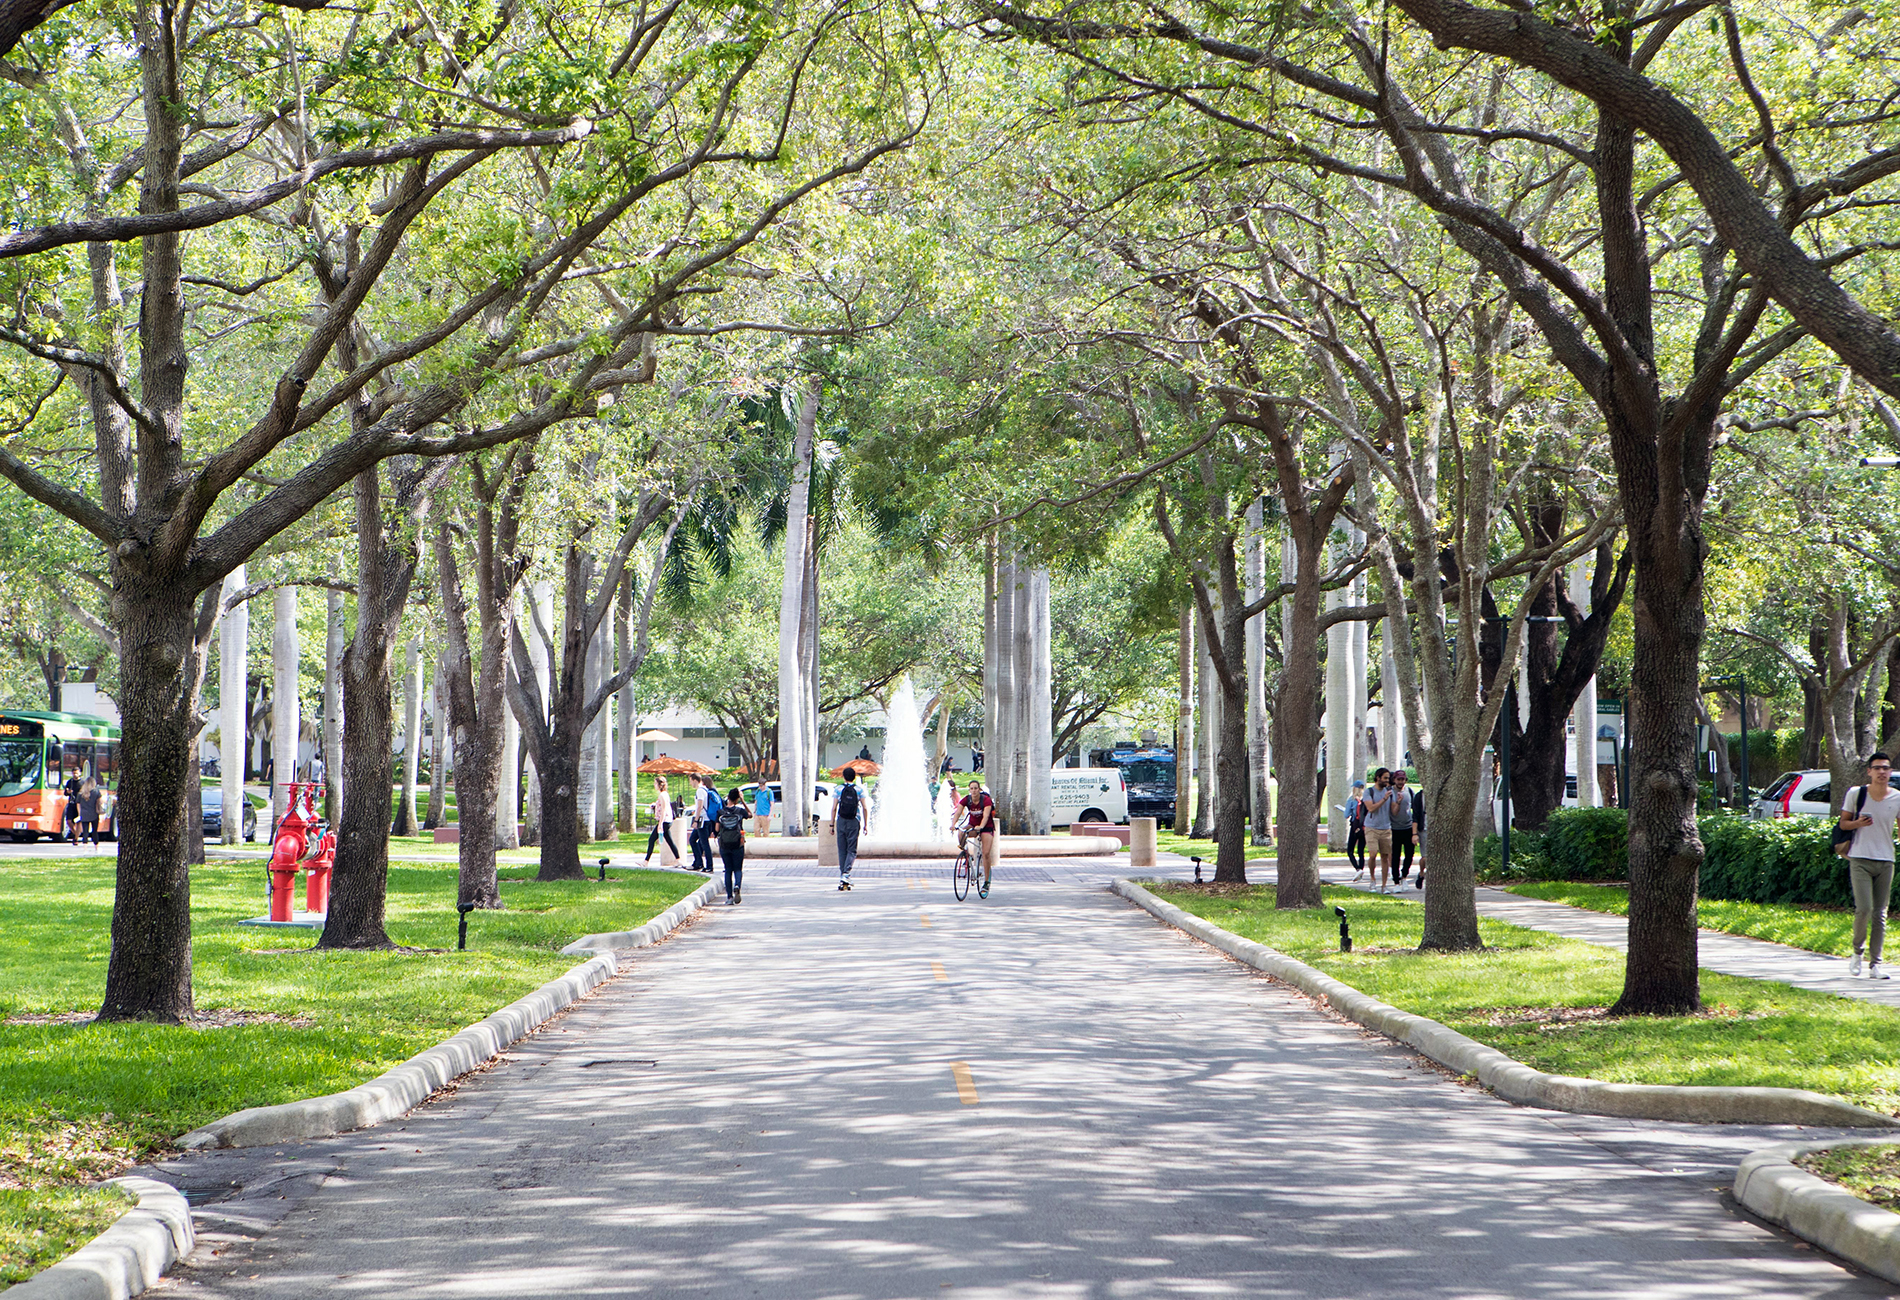 University of Miami tree-lined street with students.